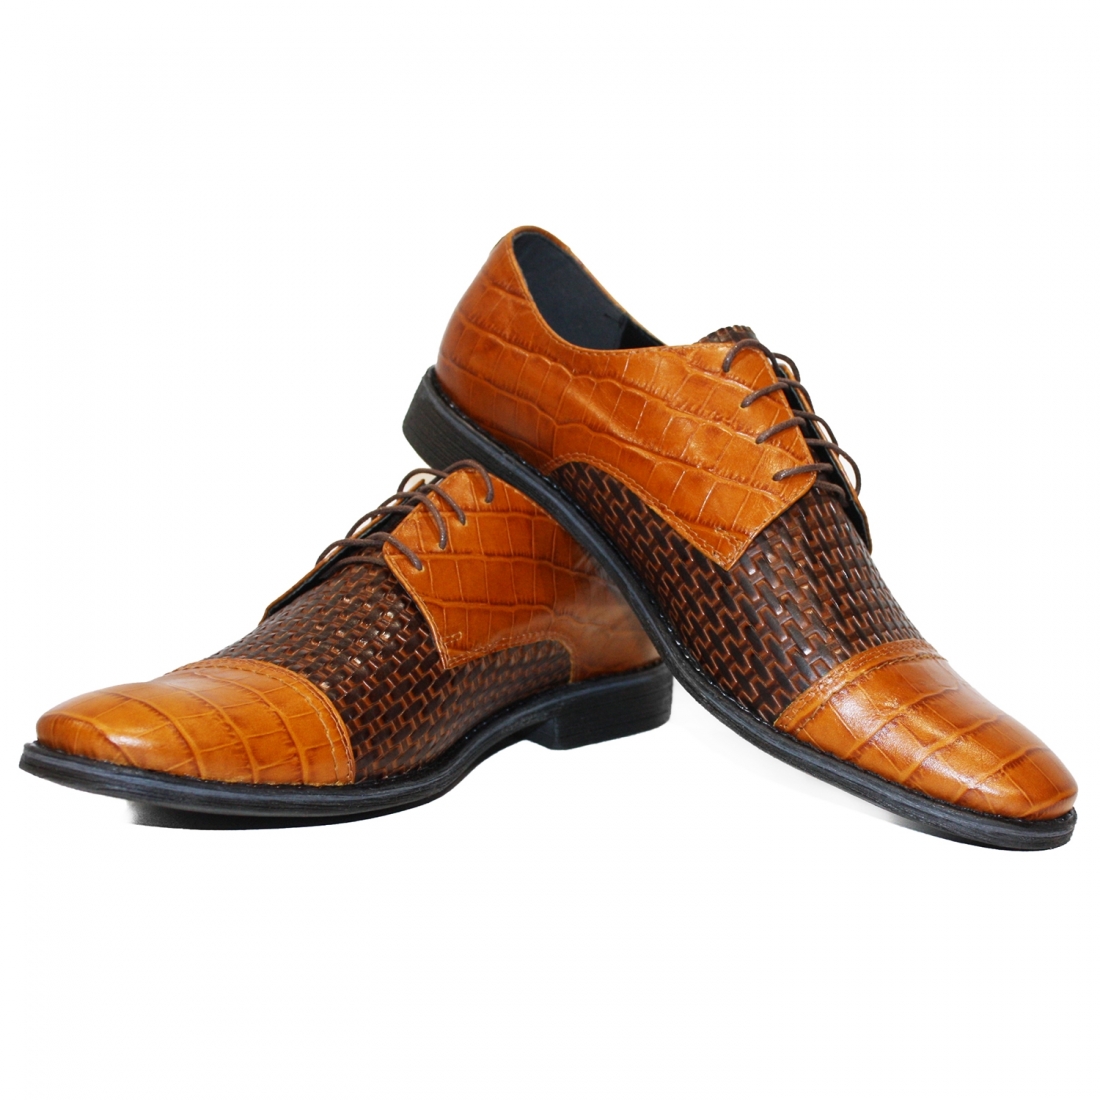 Modello Gutersso - Zapatos Clásicos - Handmade Colorful Italian Leather Shoes